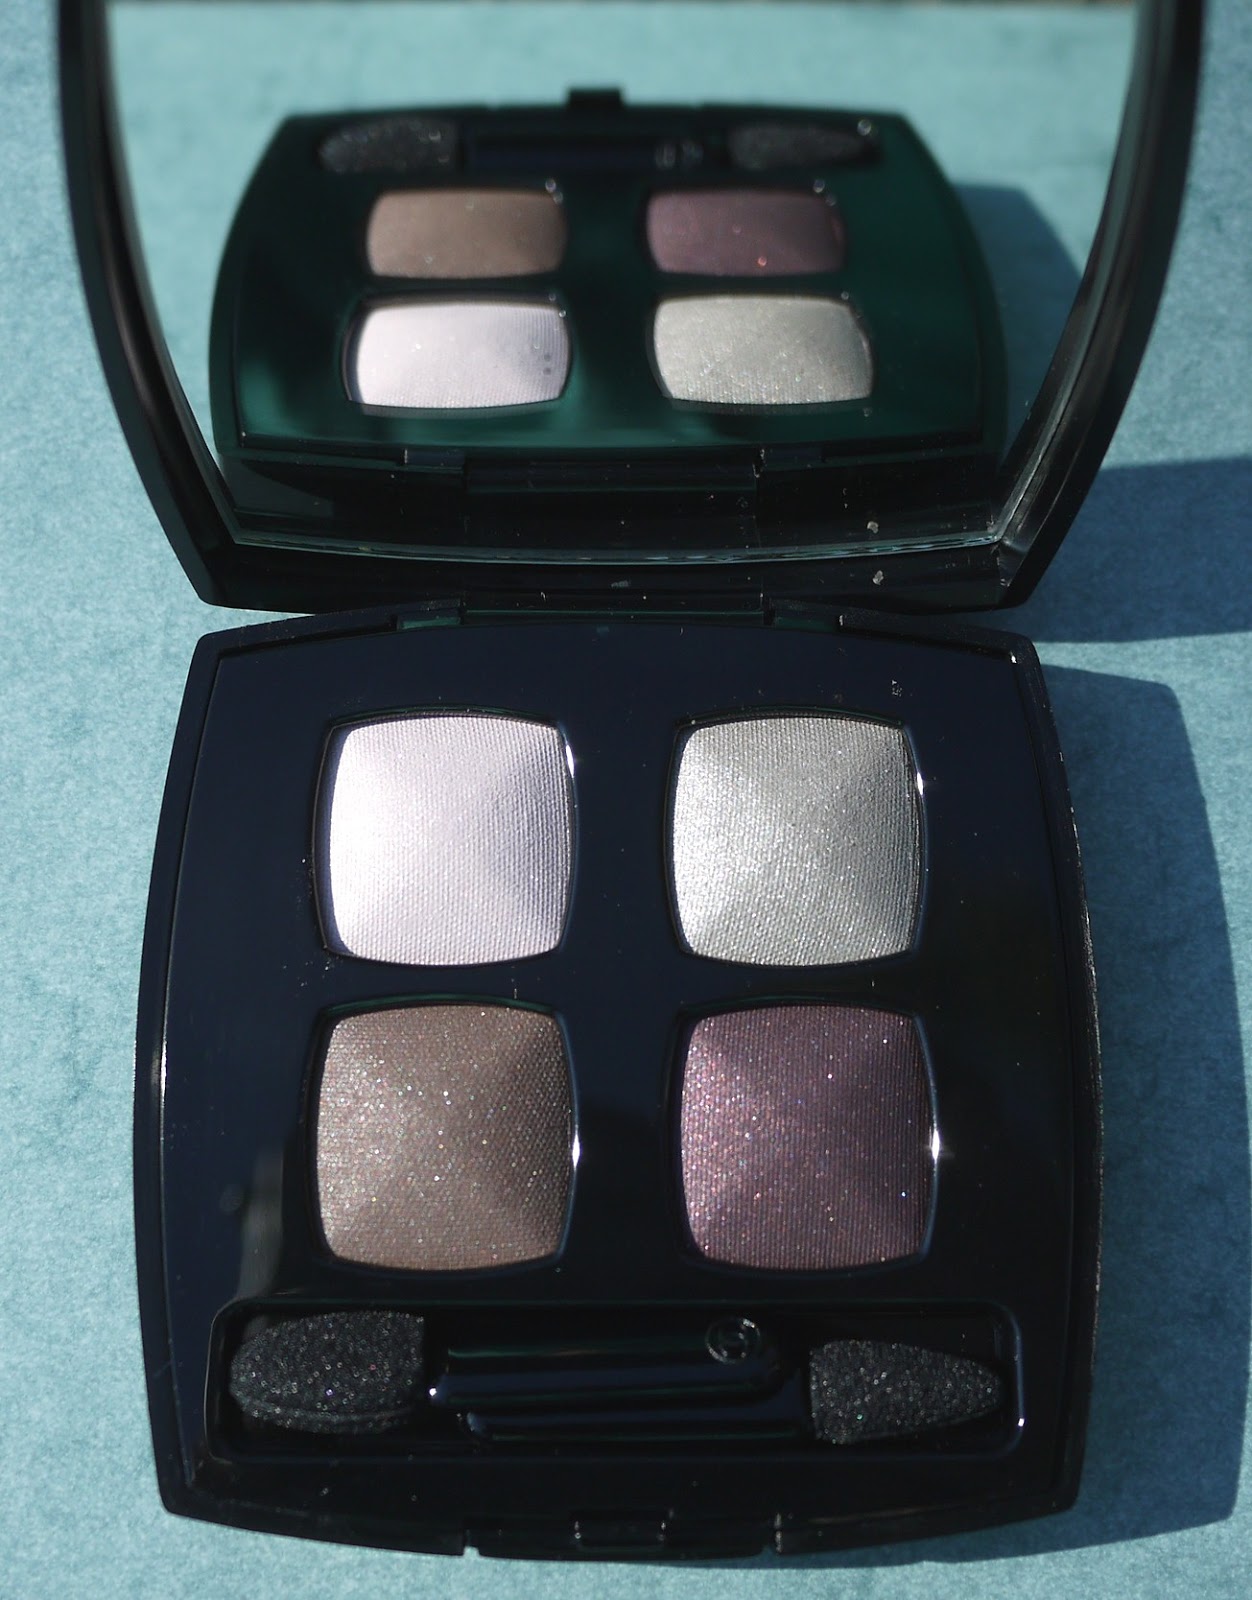 Best Things in Beauty: Chanel Les 4 Ombres Quadra Eye Shadow in Variation  from Les Expressions de Chanel